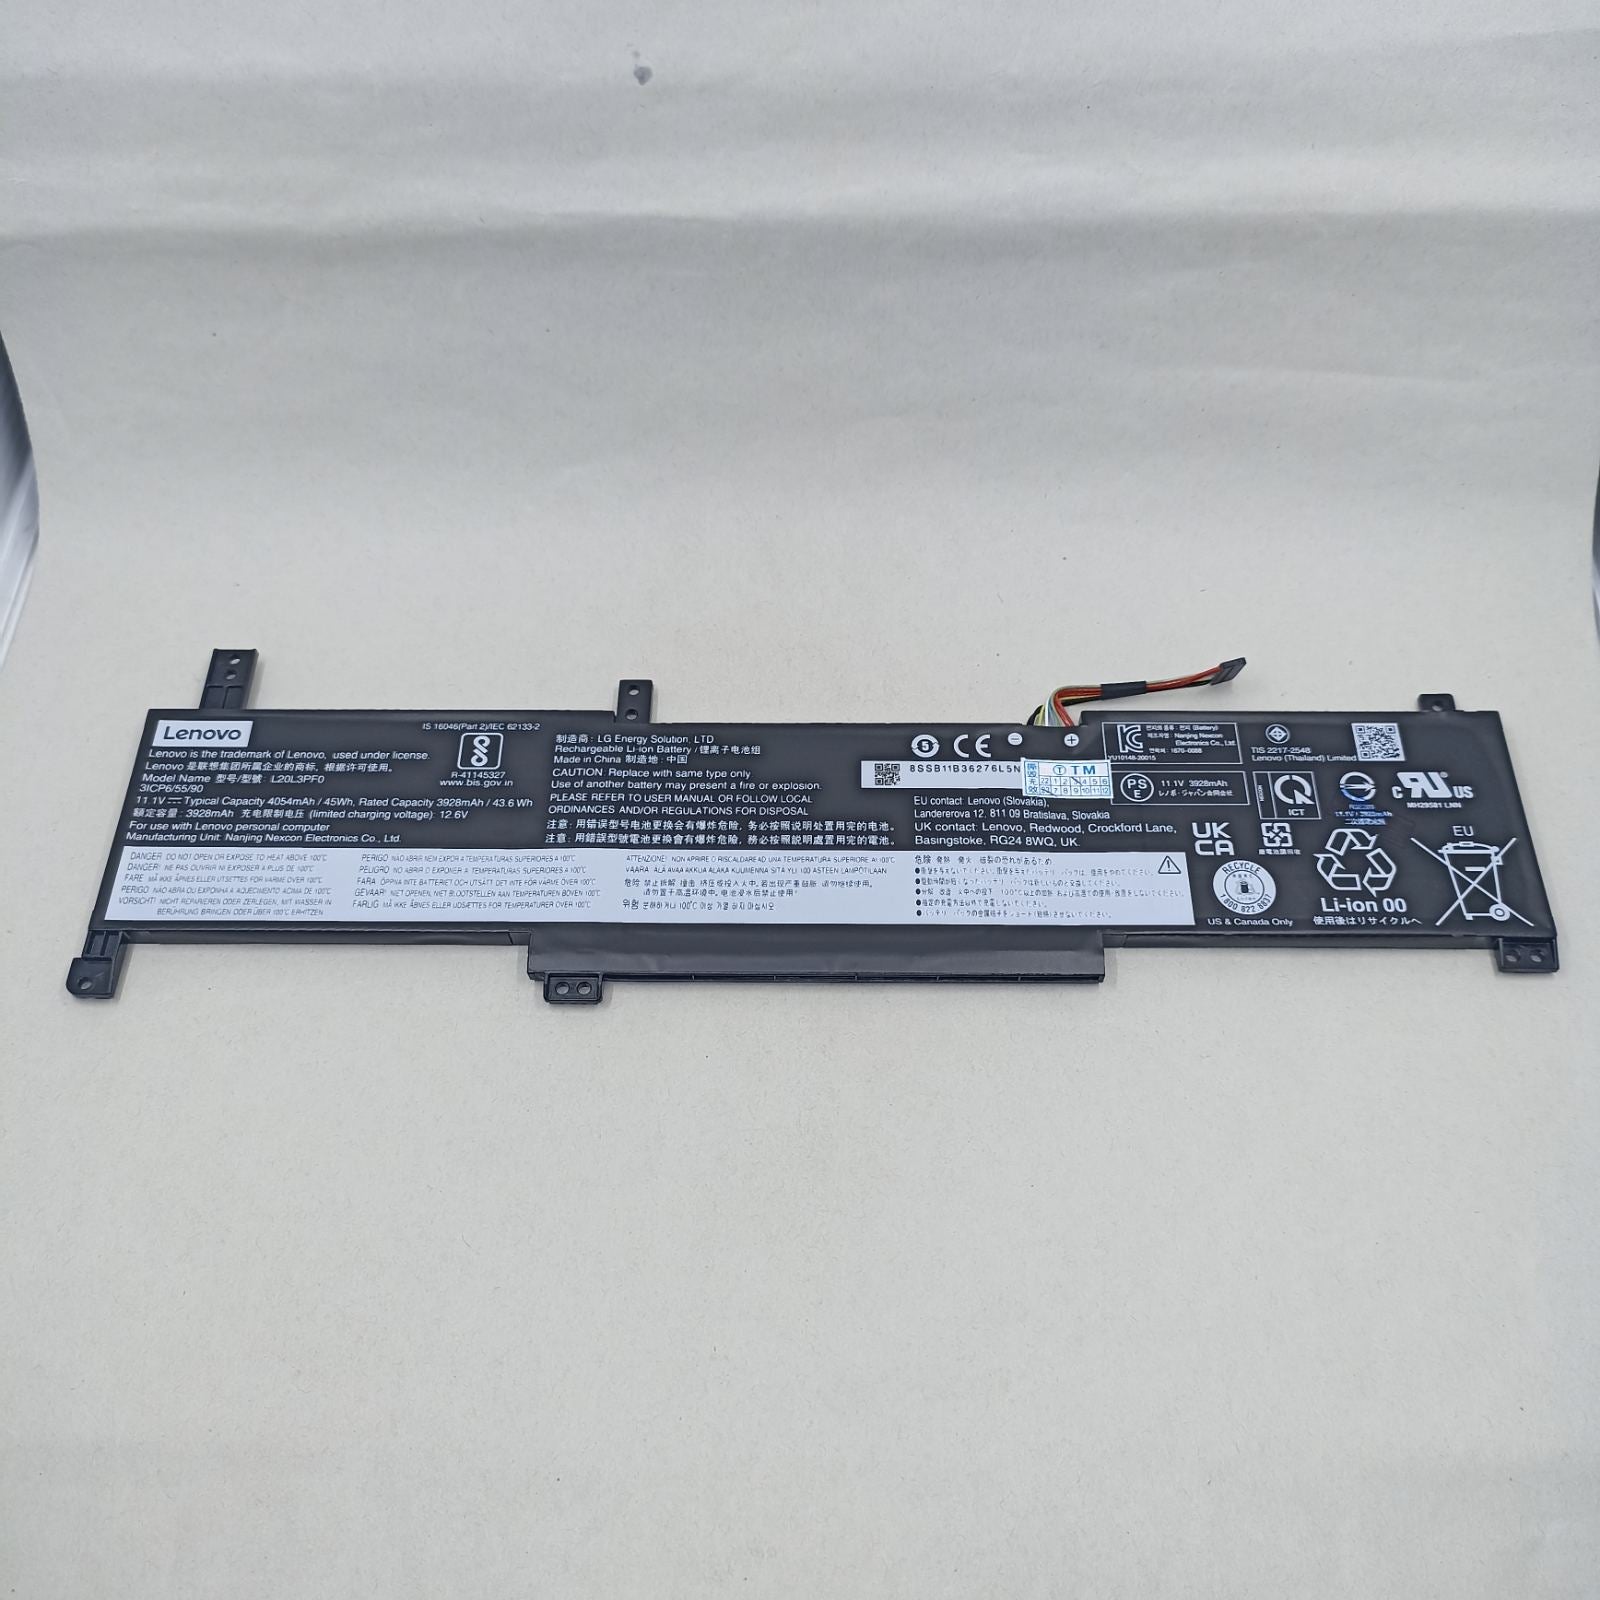 Replacement Battery for Lenovo IdeaPad 3-15ALC6 A1